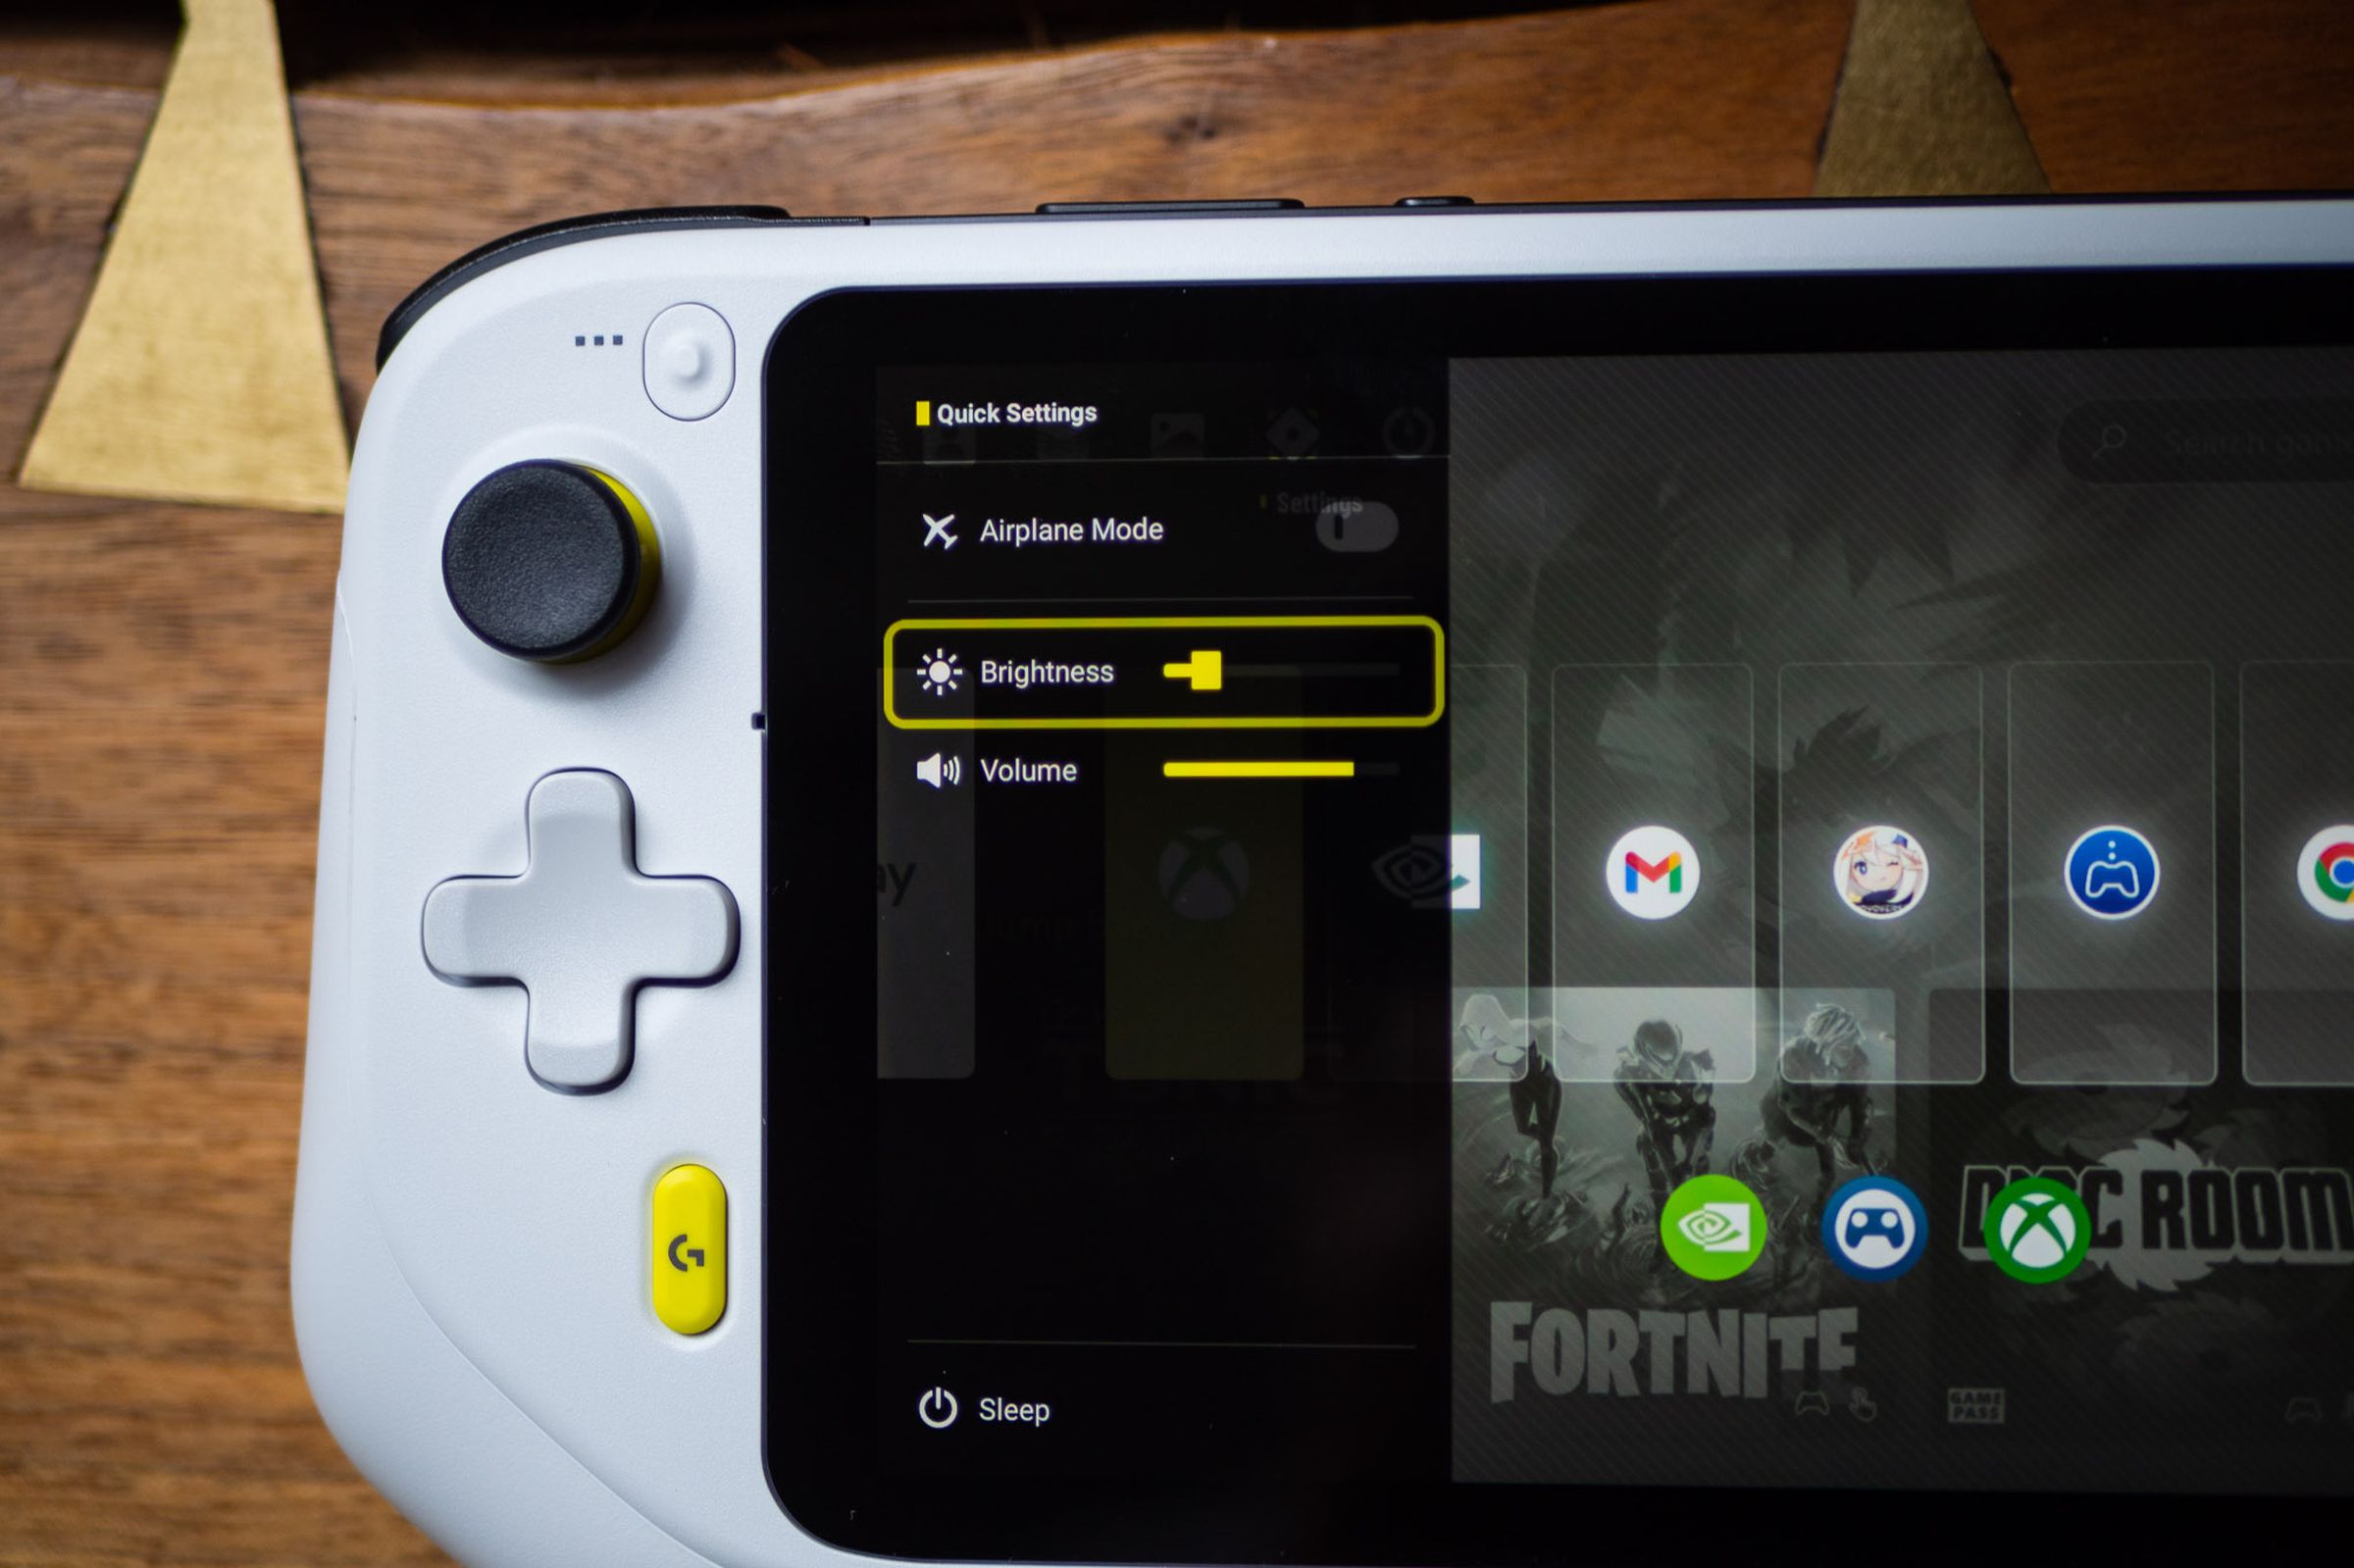 The Logitech G Cloud Gaming Handheld showing its quick settings screen, where the user can adjust the volume or brightness.